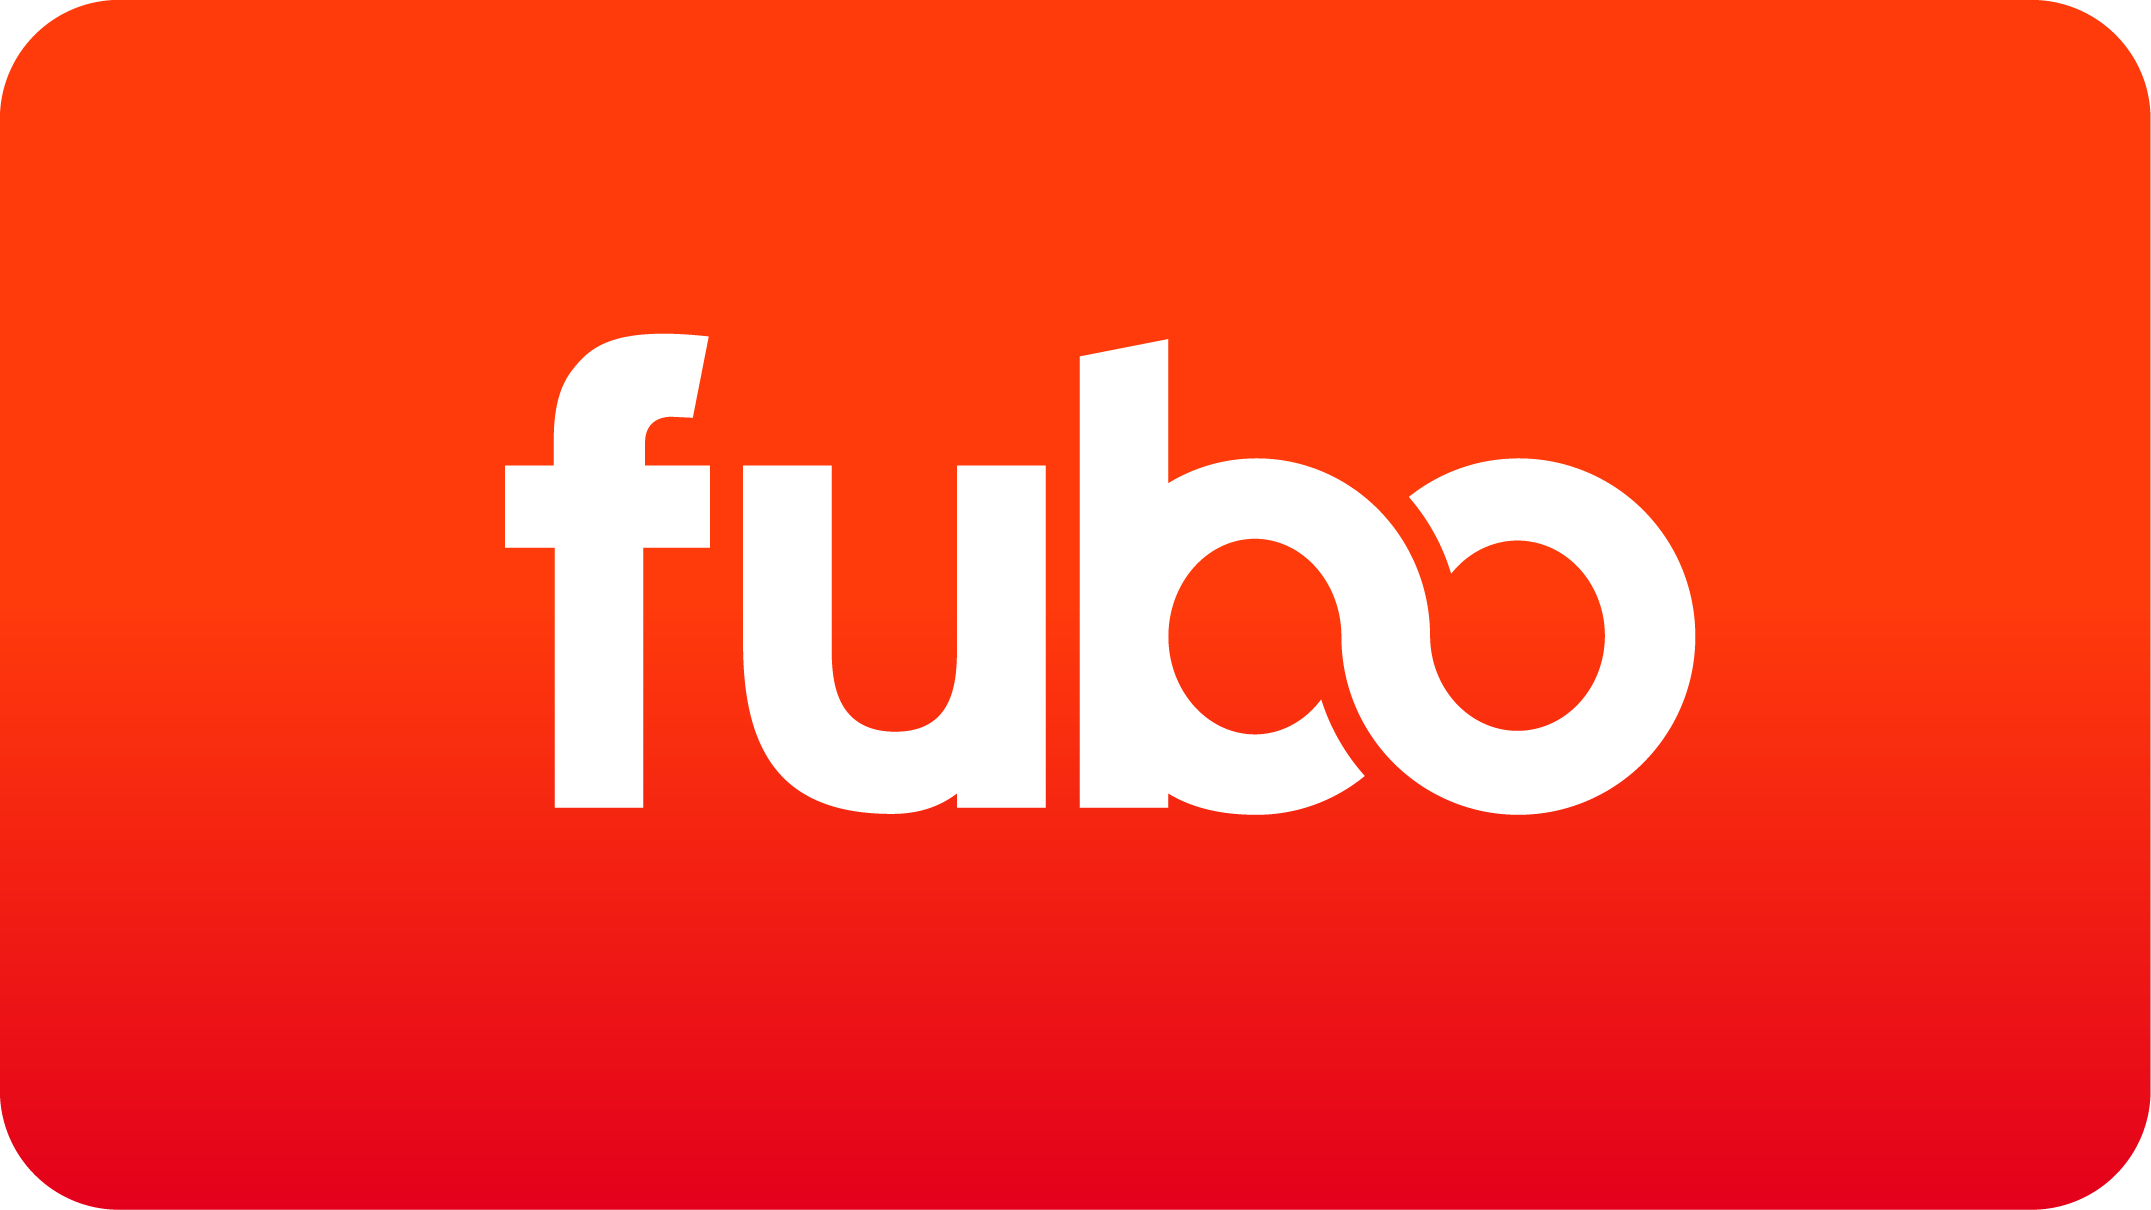 Fubo: Everything You Need to Know Including Price, Channels, DVR, & More